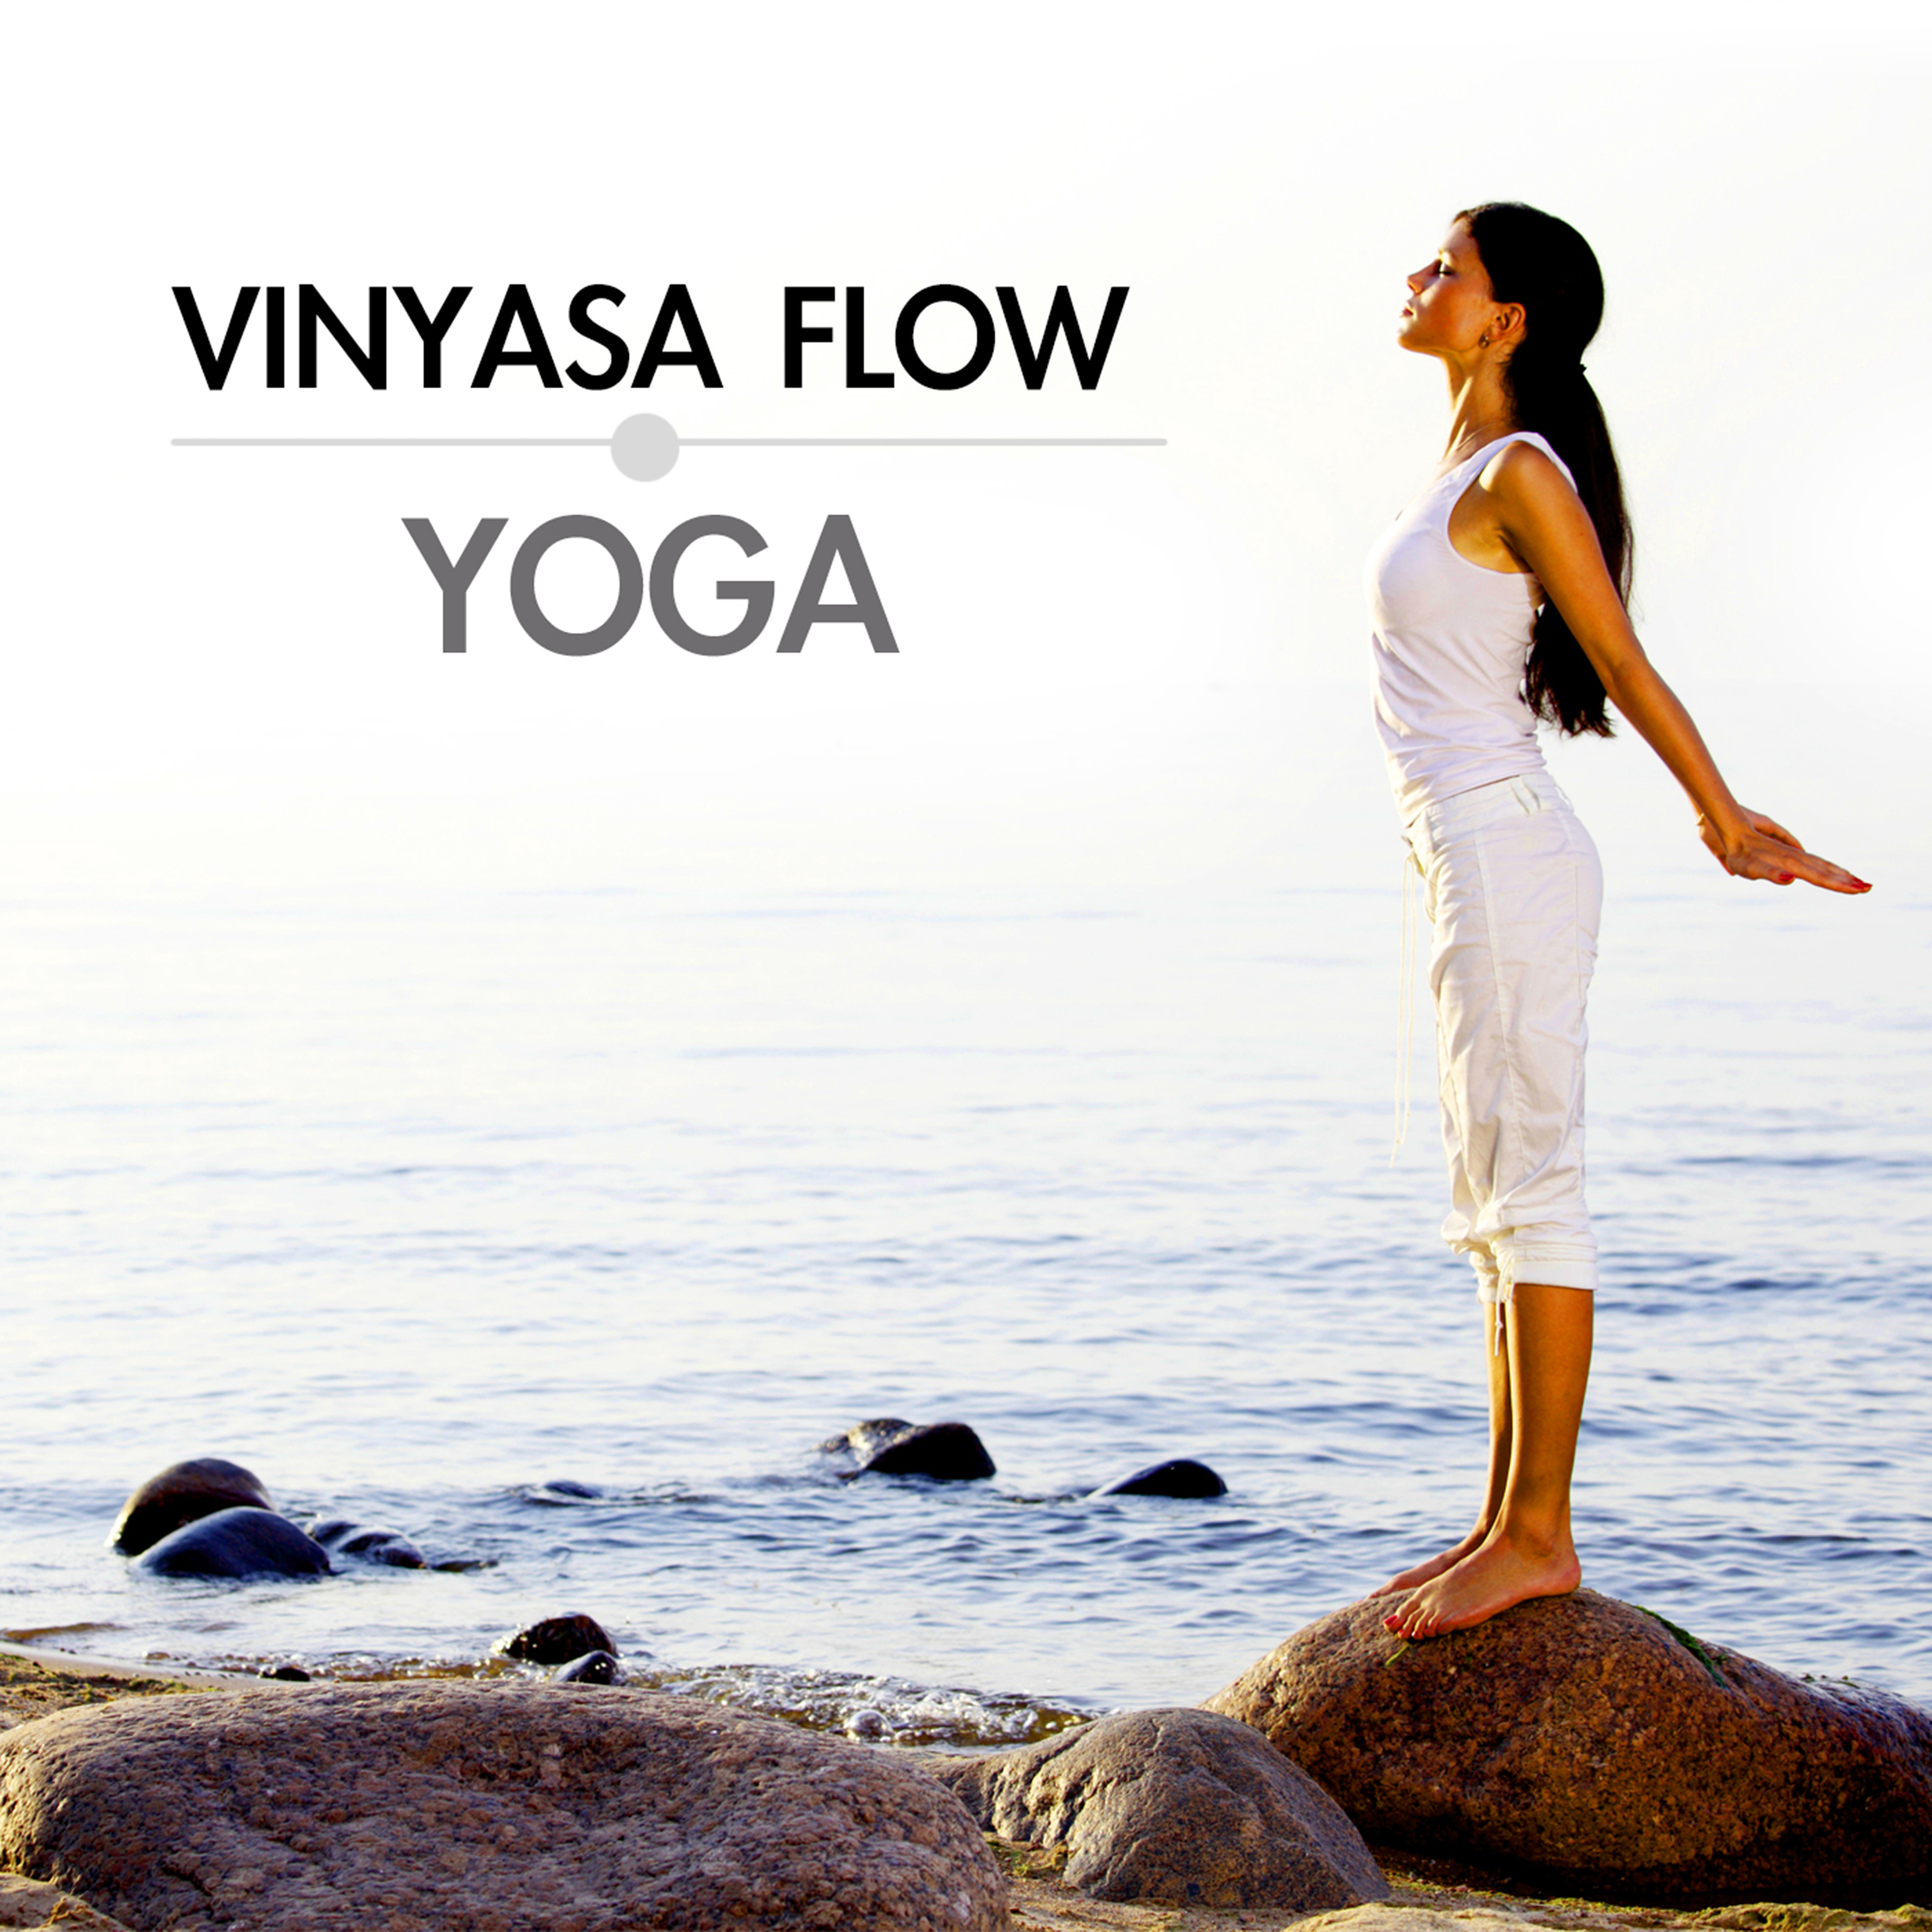 Vinyasa Flow Yoga - Chill Out & New Age Relaxation Yoga Music With Nature Sounds for Yoga Flow & Meditation